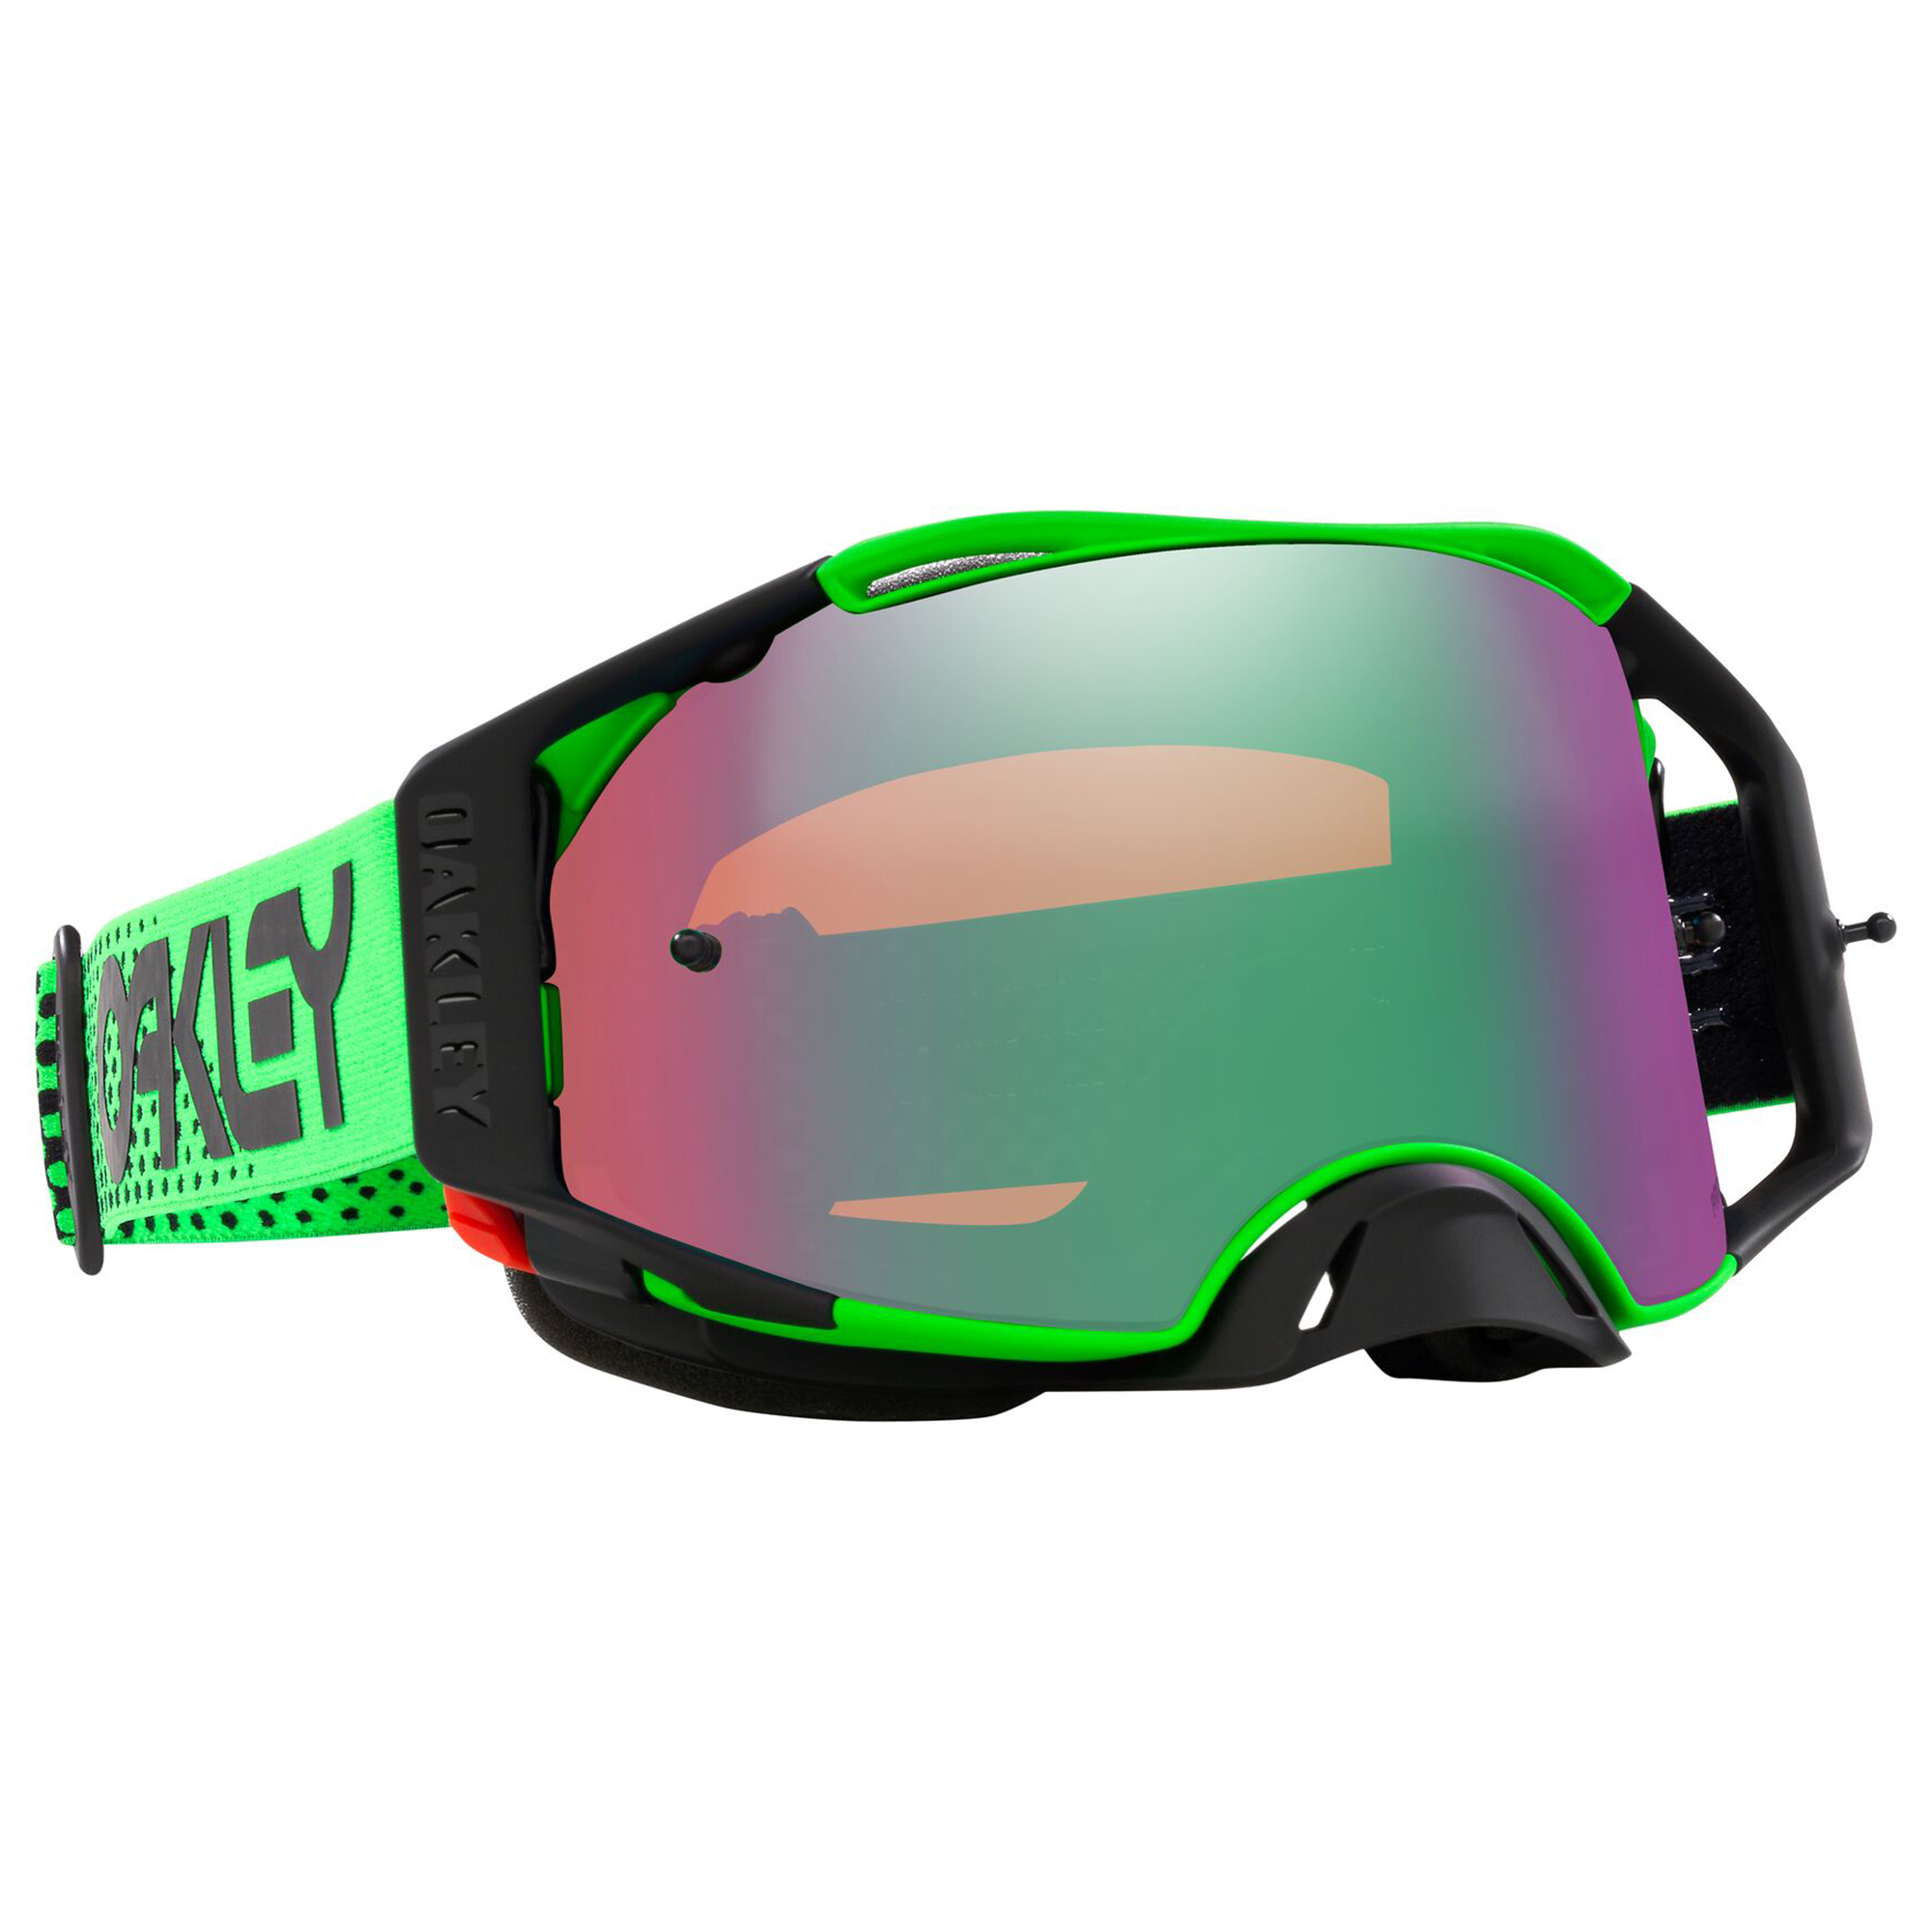 Oakley Airbrake MX Goggle in Moto Green with Prizm MX Jade Lens on white background